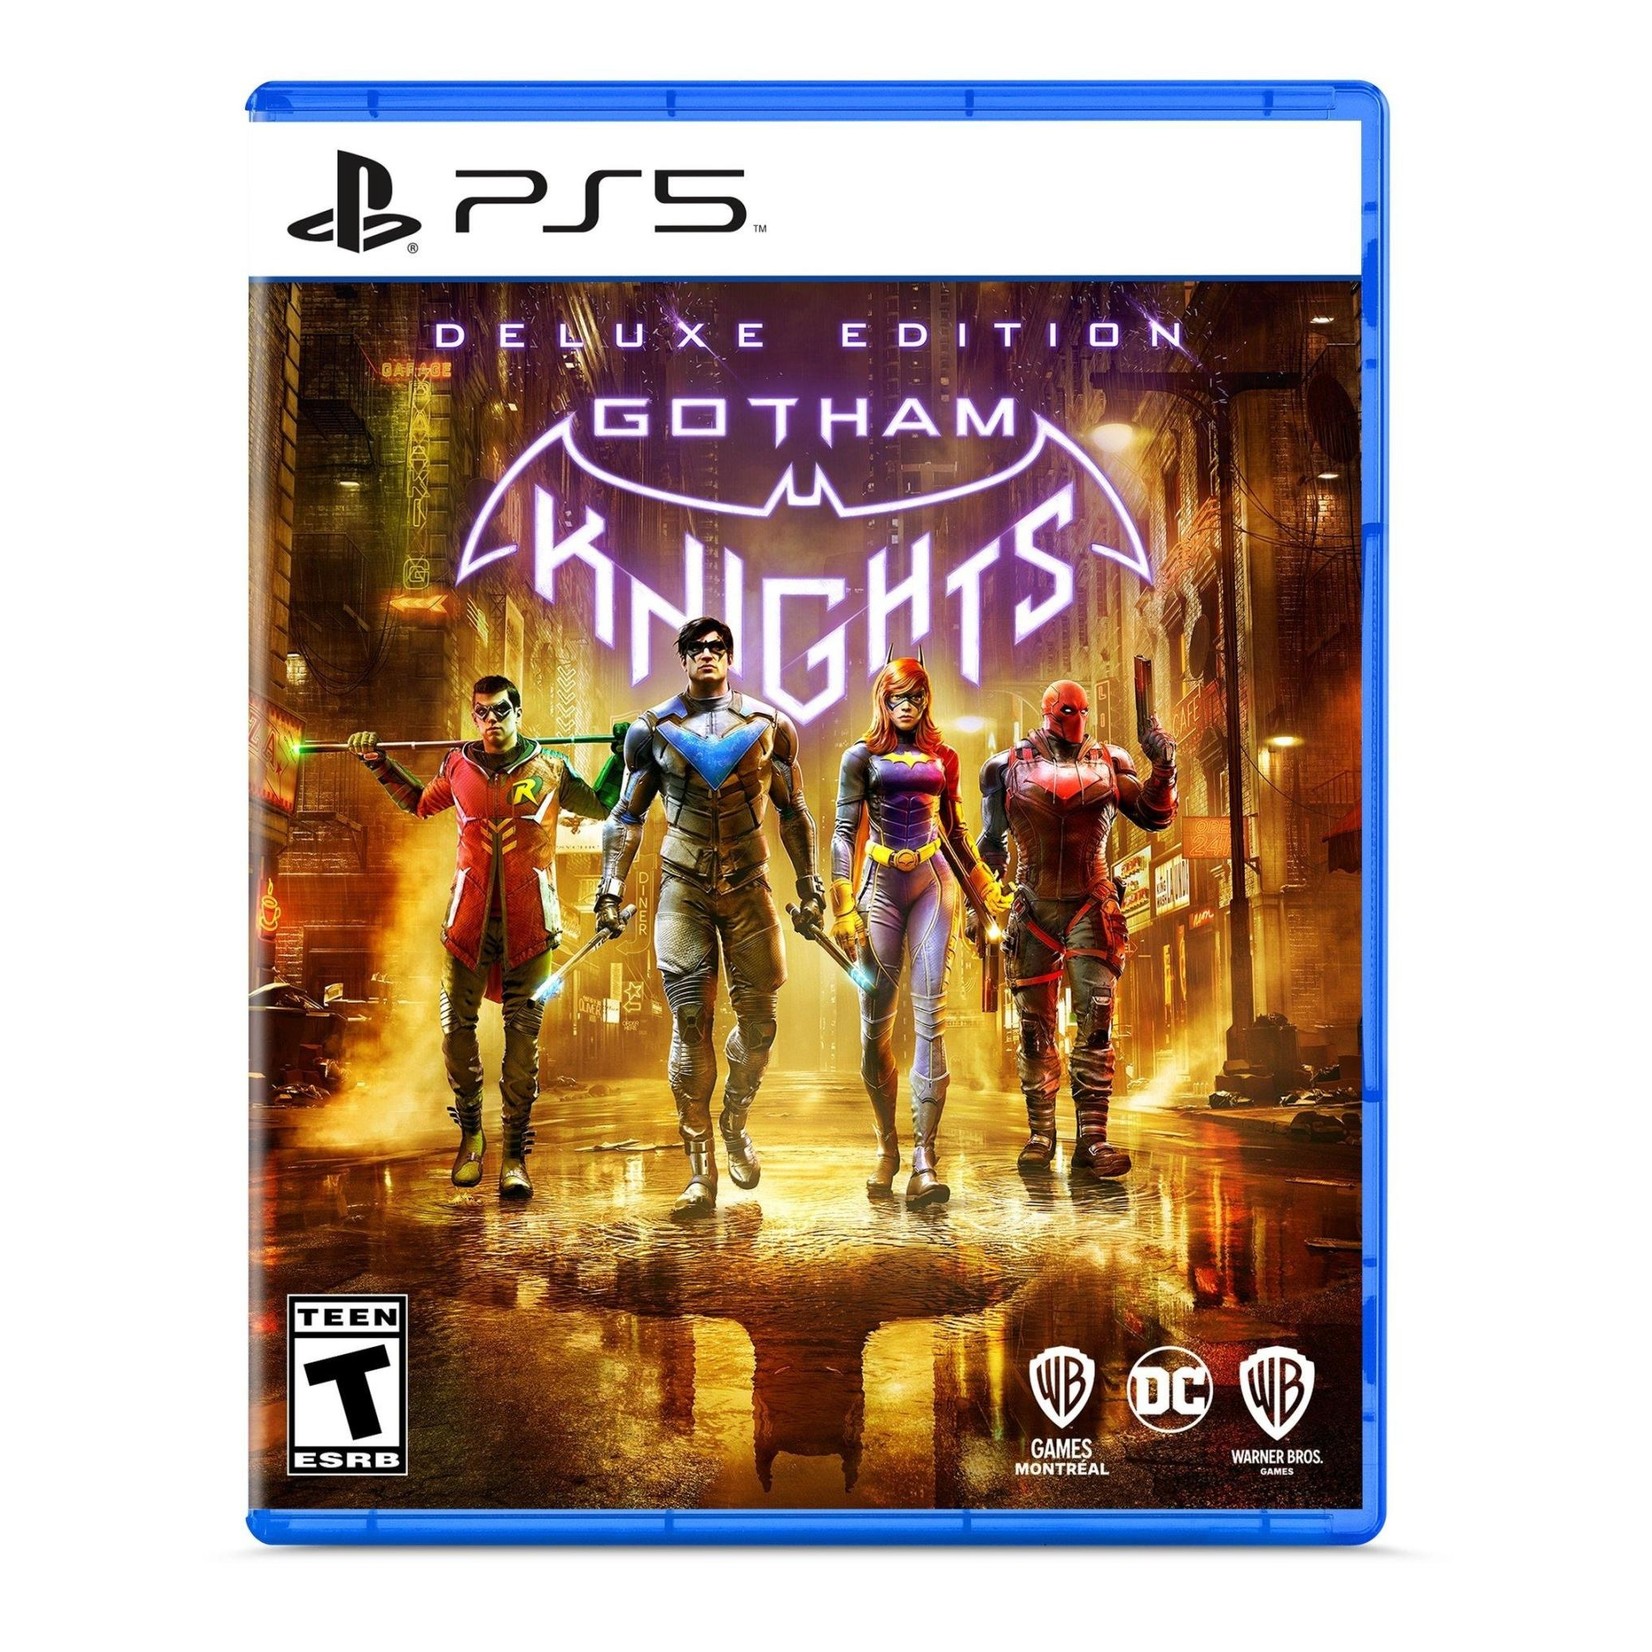 PS5-Gotham Knights Deluxe